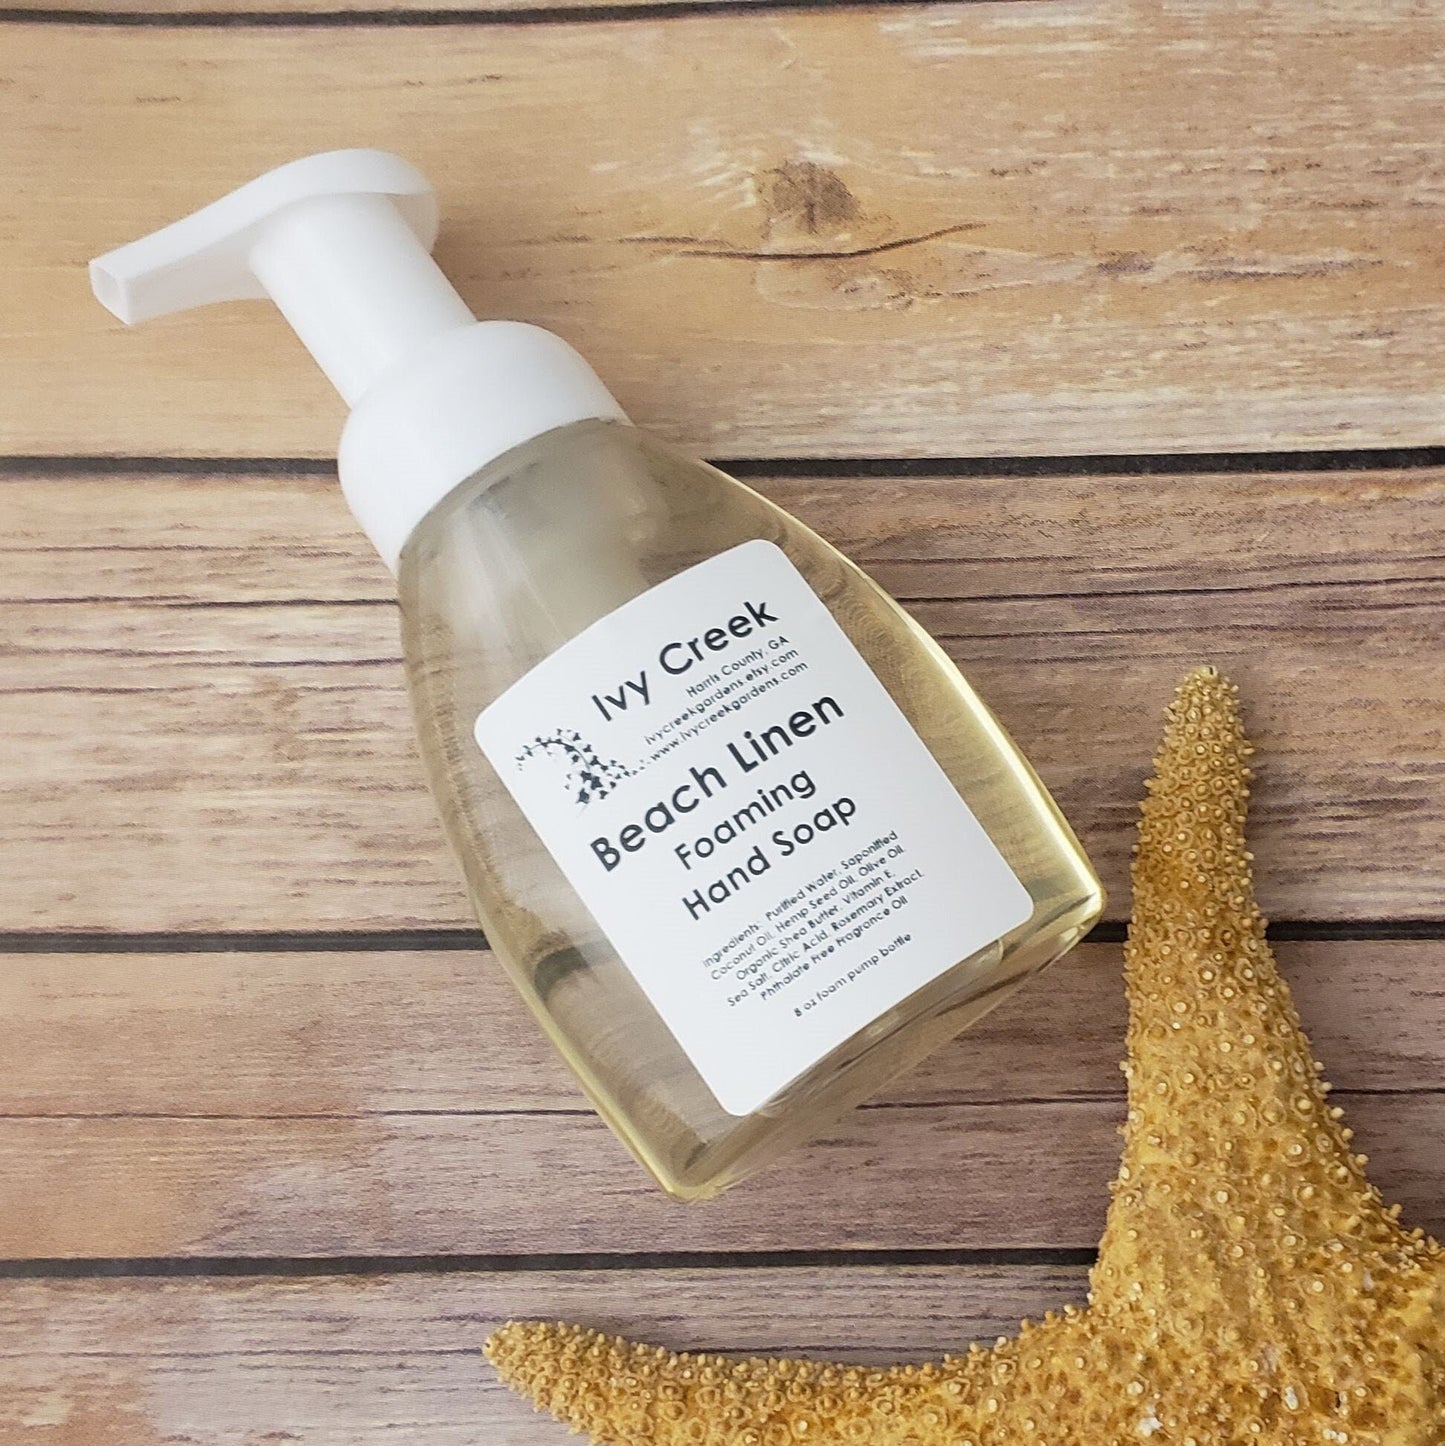 Ivy Creek Beach Linen Foaming Hand Soap - Natural and Moisturizing Hand Soap - Clean and Calming Scent - 8 oz